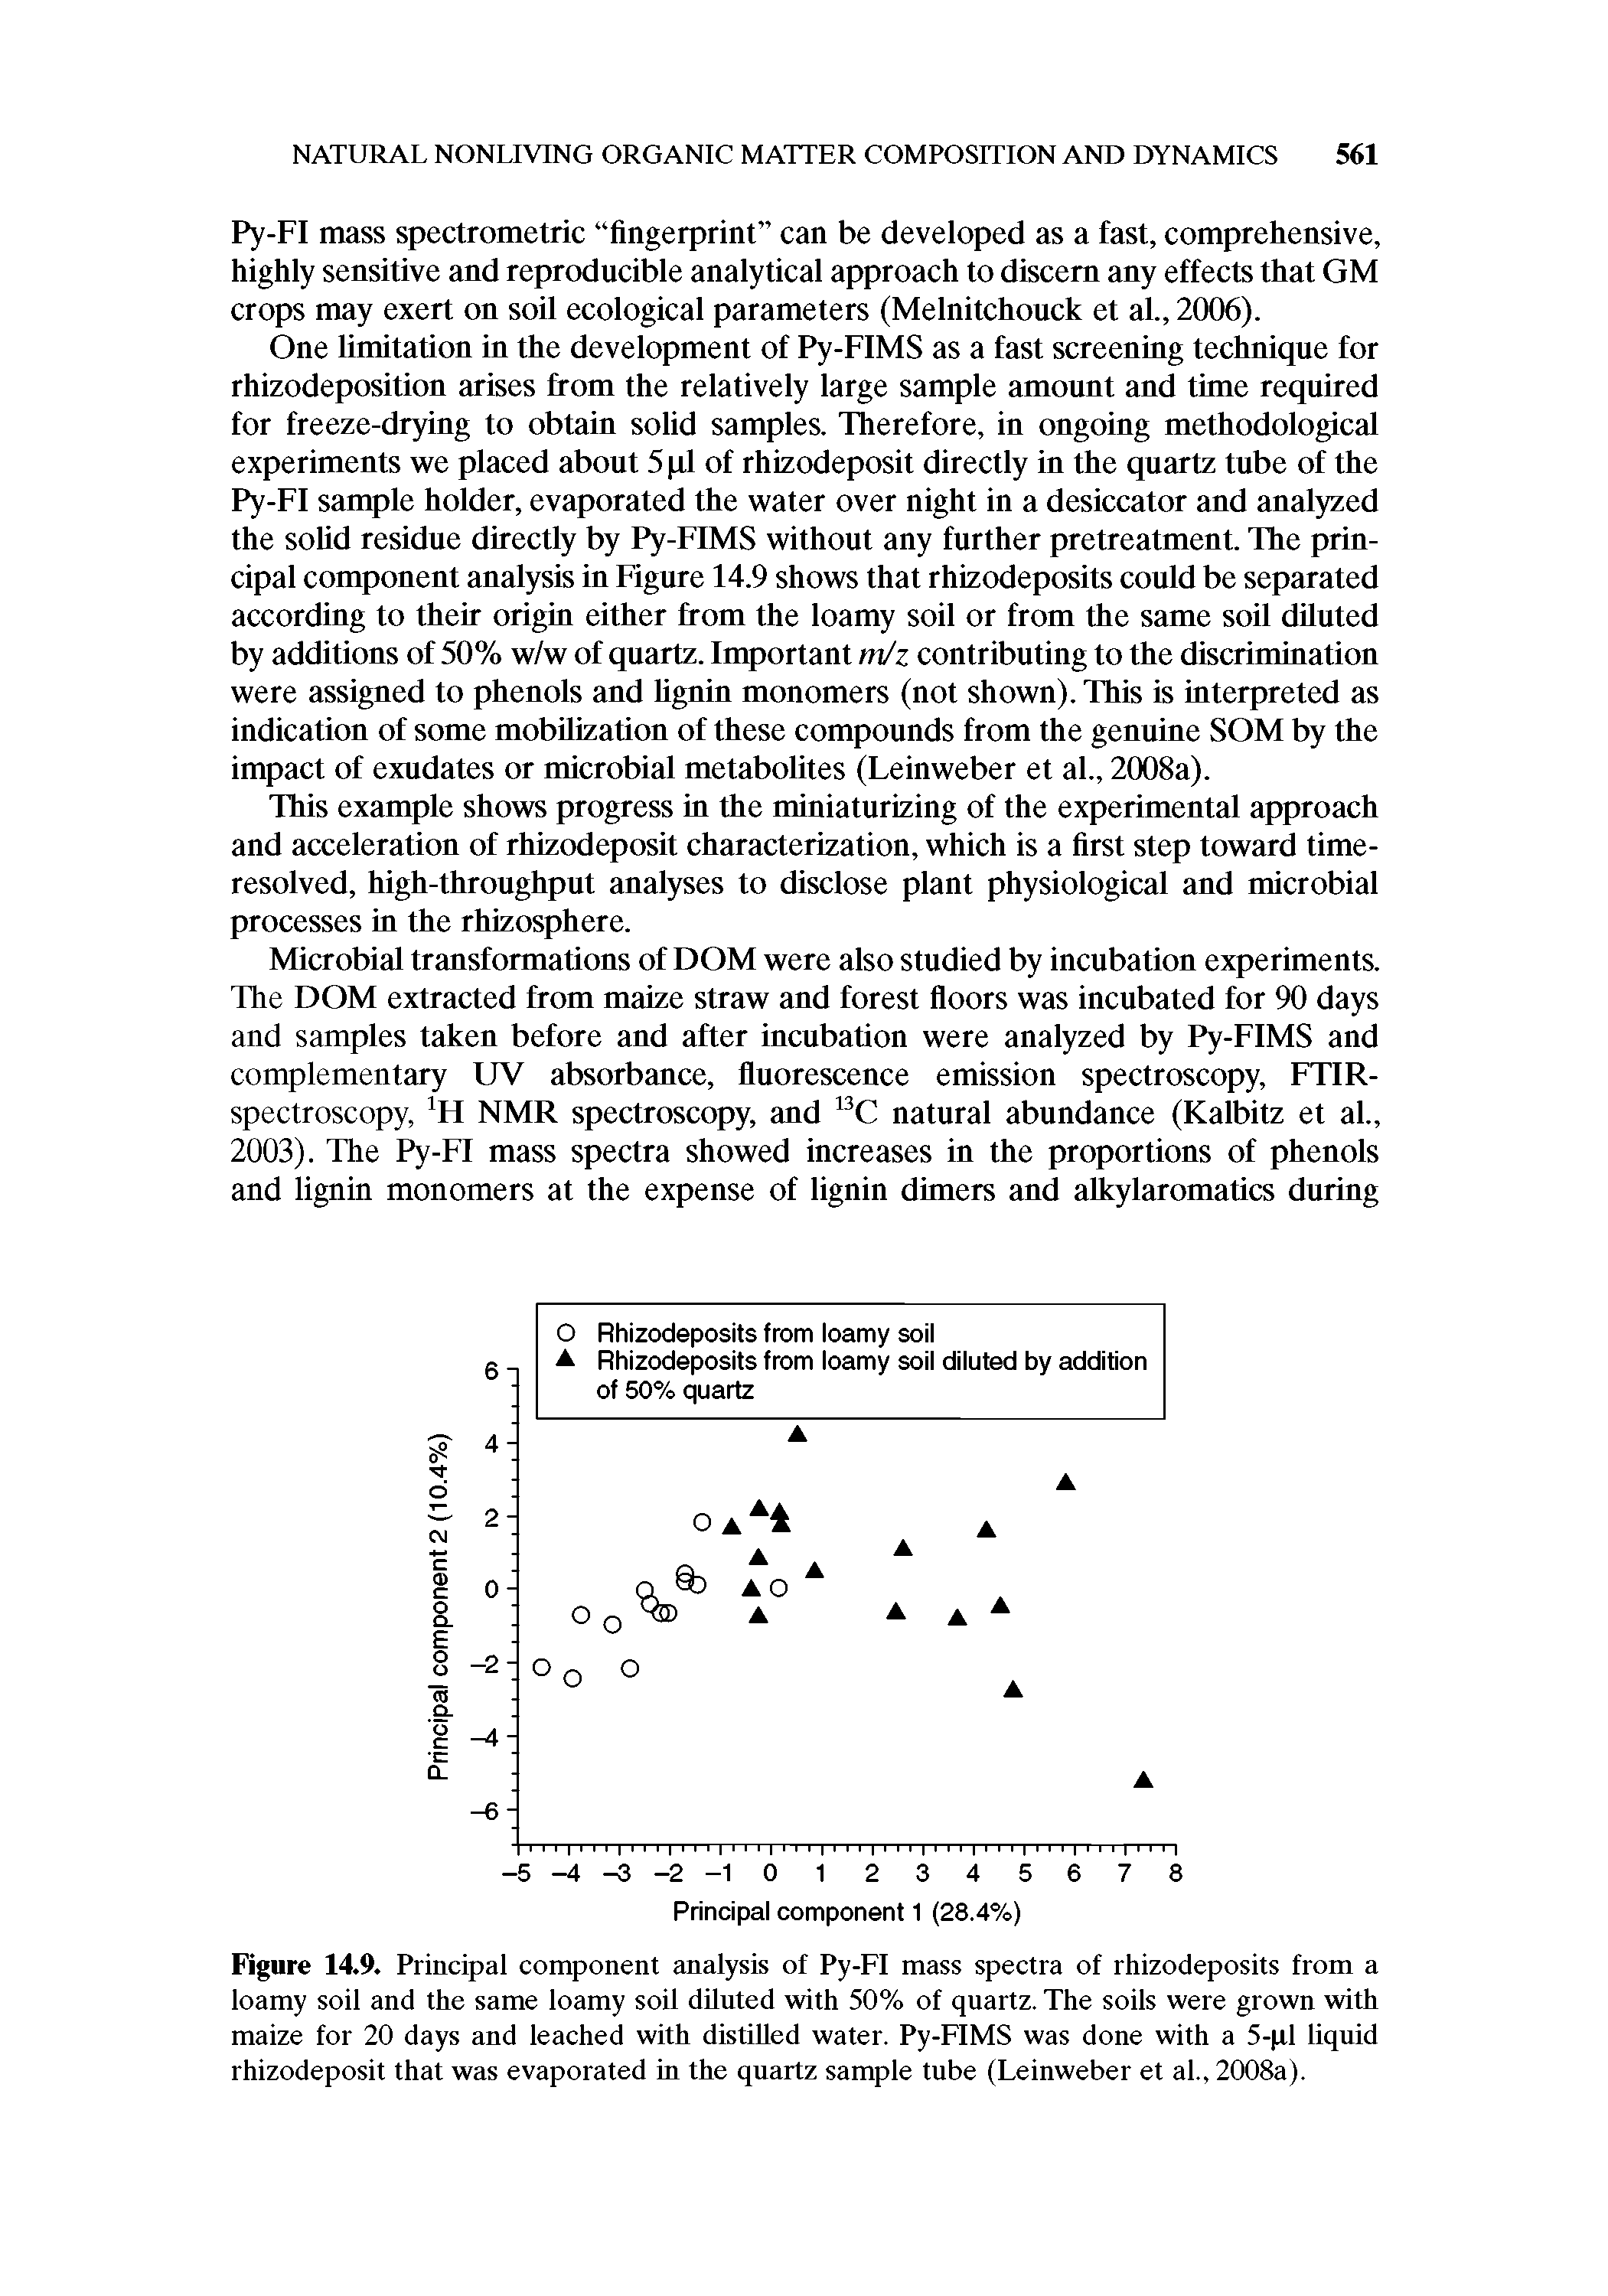 Figure 14.9. Principal component analysis of Py-FI mass spectra of rhizodeposits from a loamy soil and the same loamy soil diluted with 50% of quartz. The soils were grown with maize for 20 days and leached with distilled water. Py-FIMS was done with a 5-pi liquid rhizodeposit that was evaporated in the quartz sample tube (Leinweber et al., 2008a).